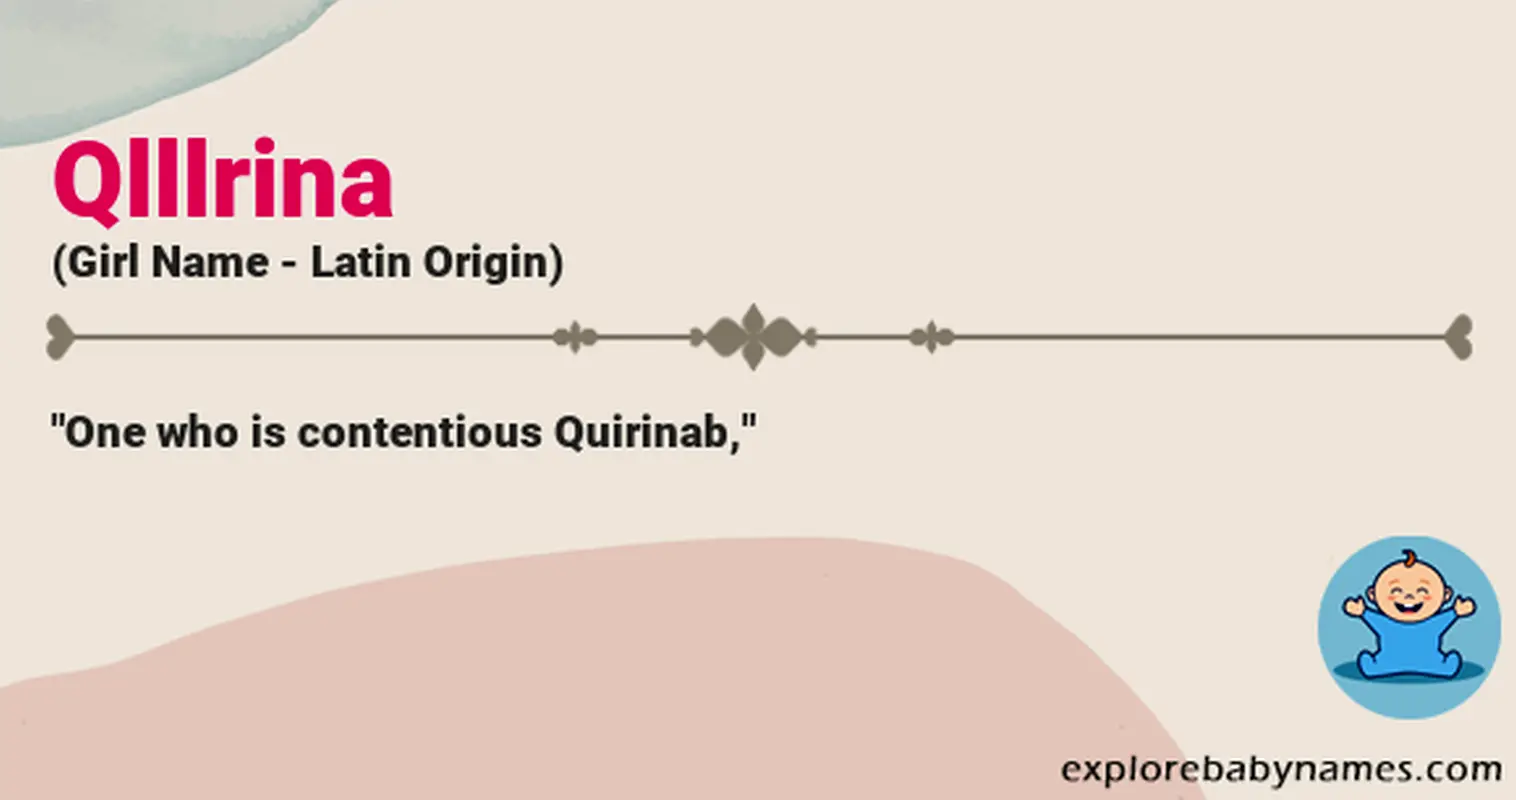 Meaning of Qlllrina